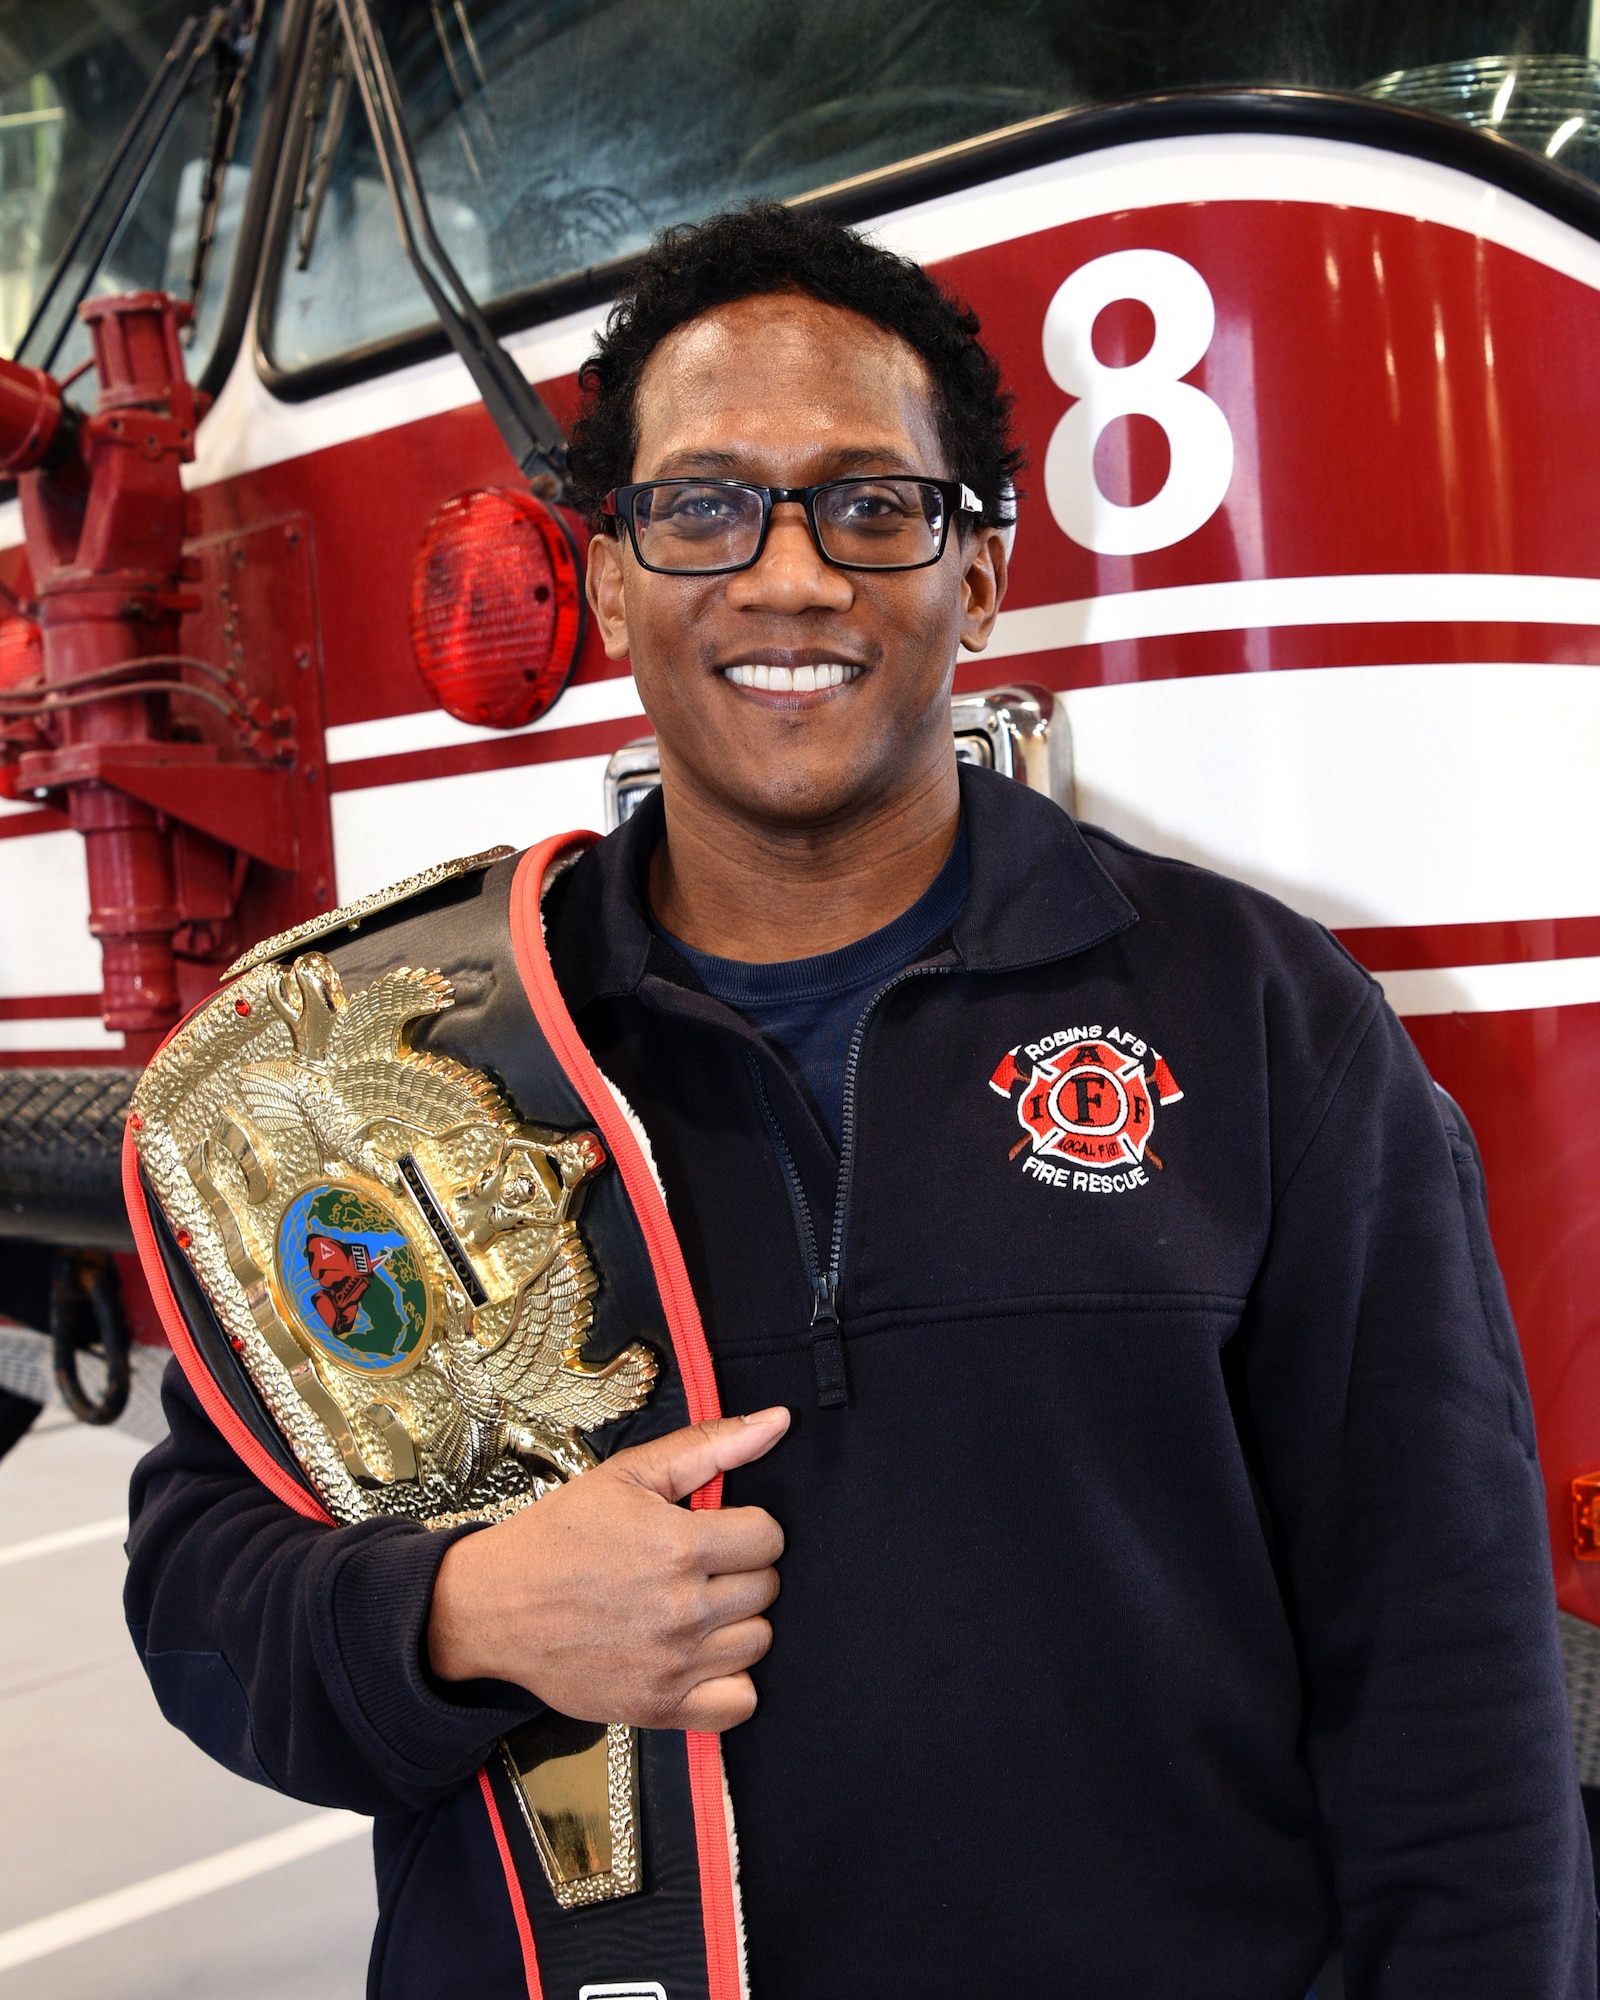 Robins firefighters use boxing to stay fit to fight flames